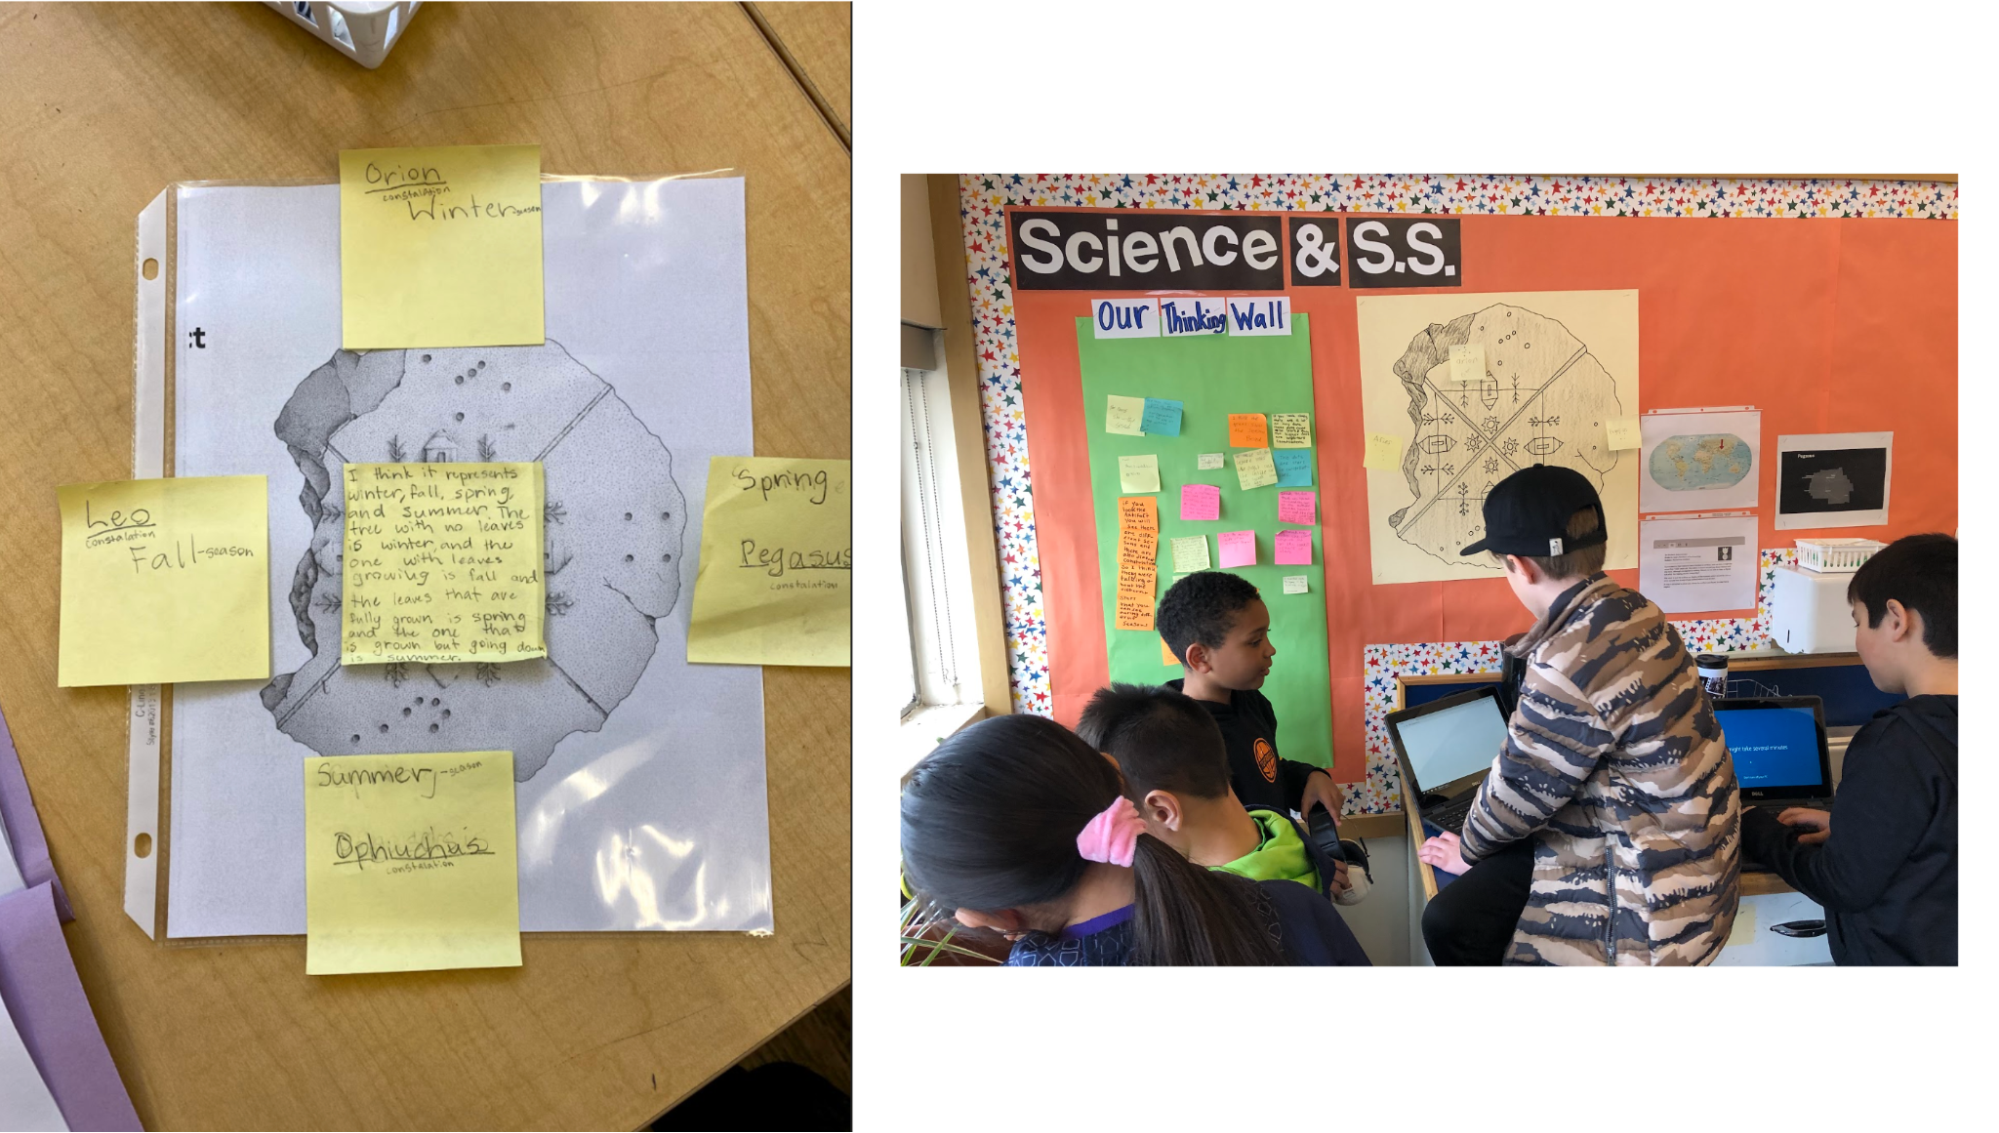 Left image shows a circle with a few constellations from each part of a year, divided into 4 parts with a sticky note for each section (spring, summer, fall, and winter) and a sticky note in the center with an explanation of student thoughts about the constellations and the four seasons. The image on the right is of 5 students discussing and working on laptop. 